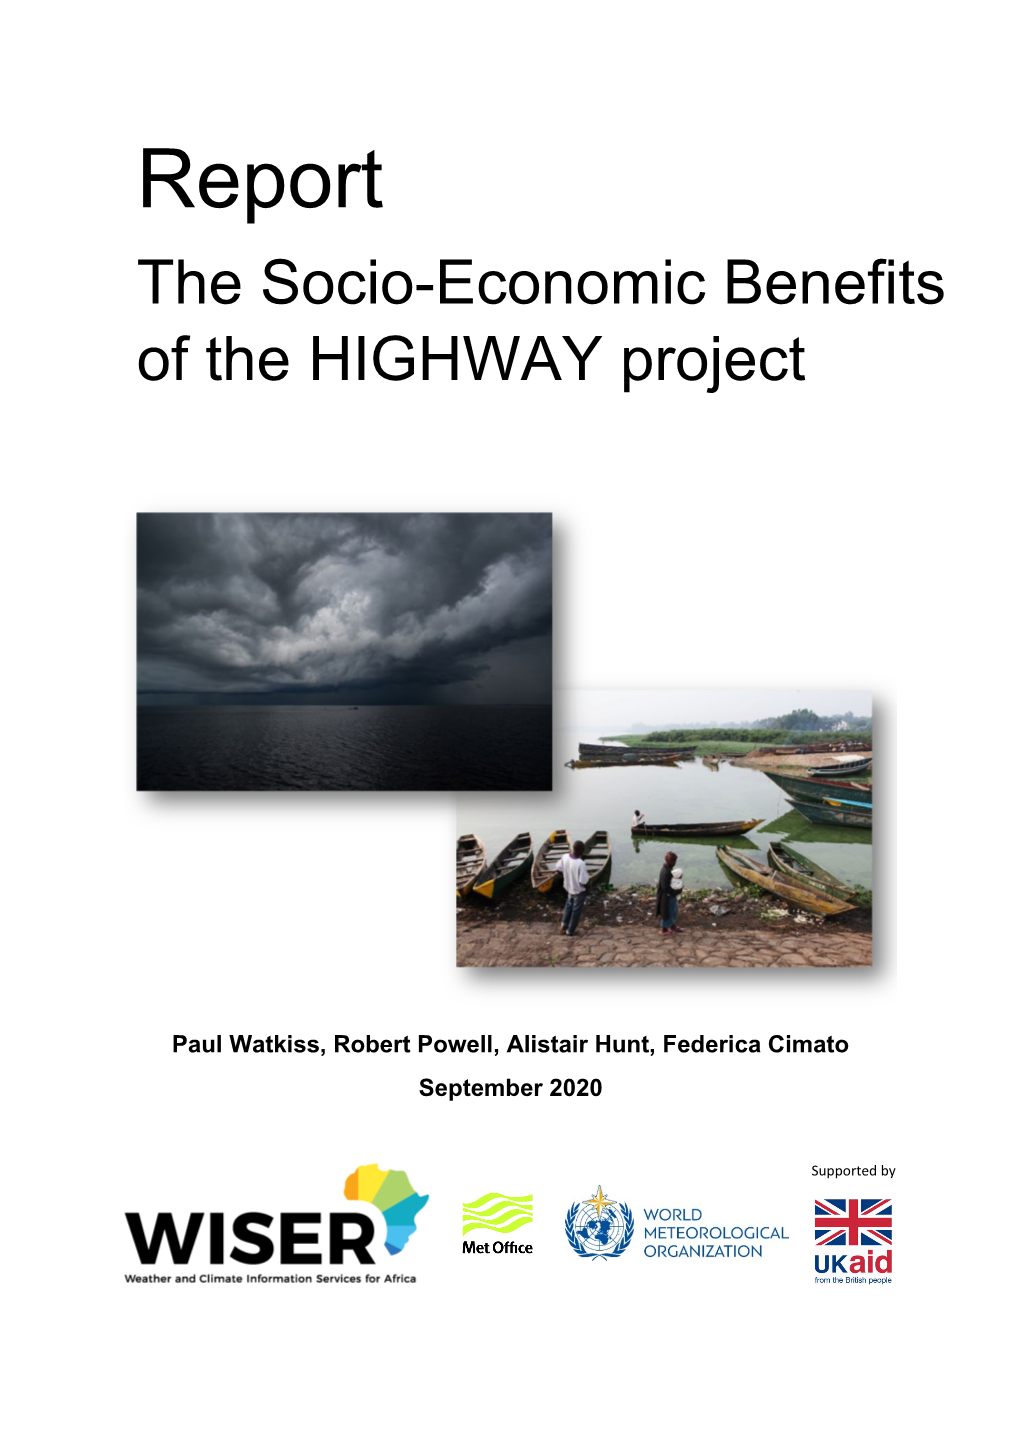 The Socio-Economic Benefits of the HIGHWAY Project